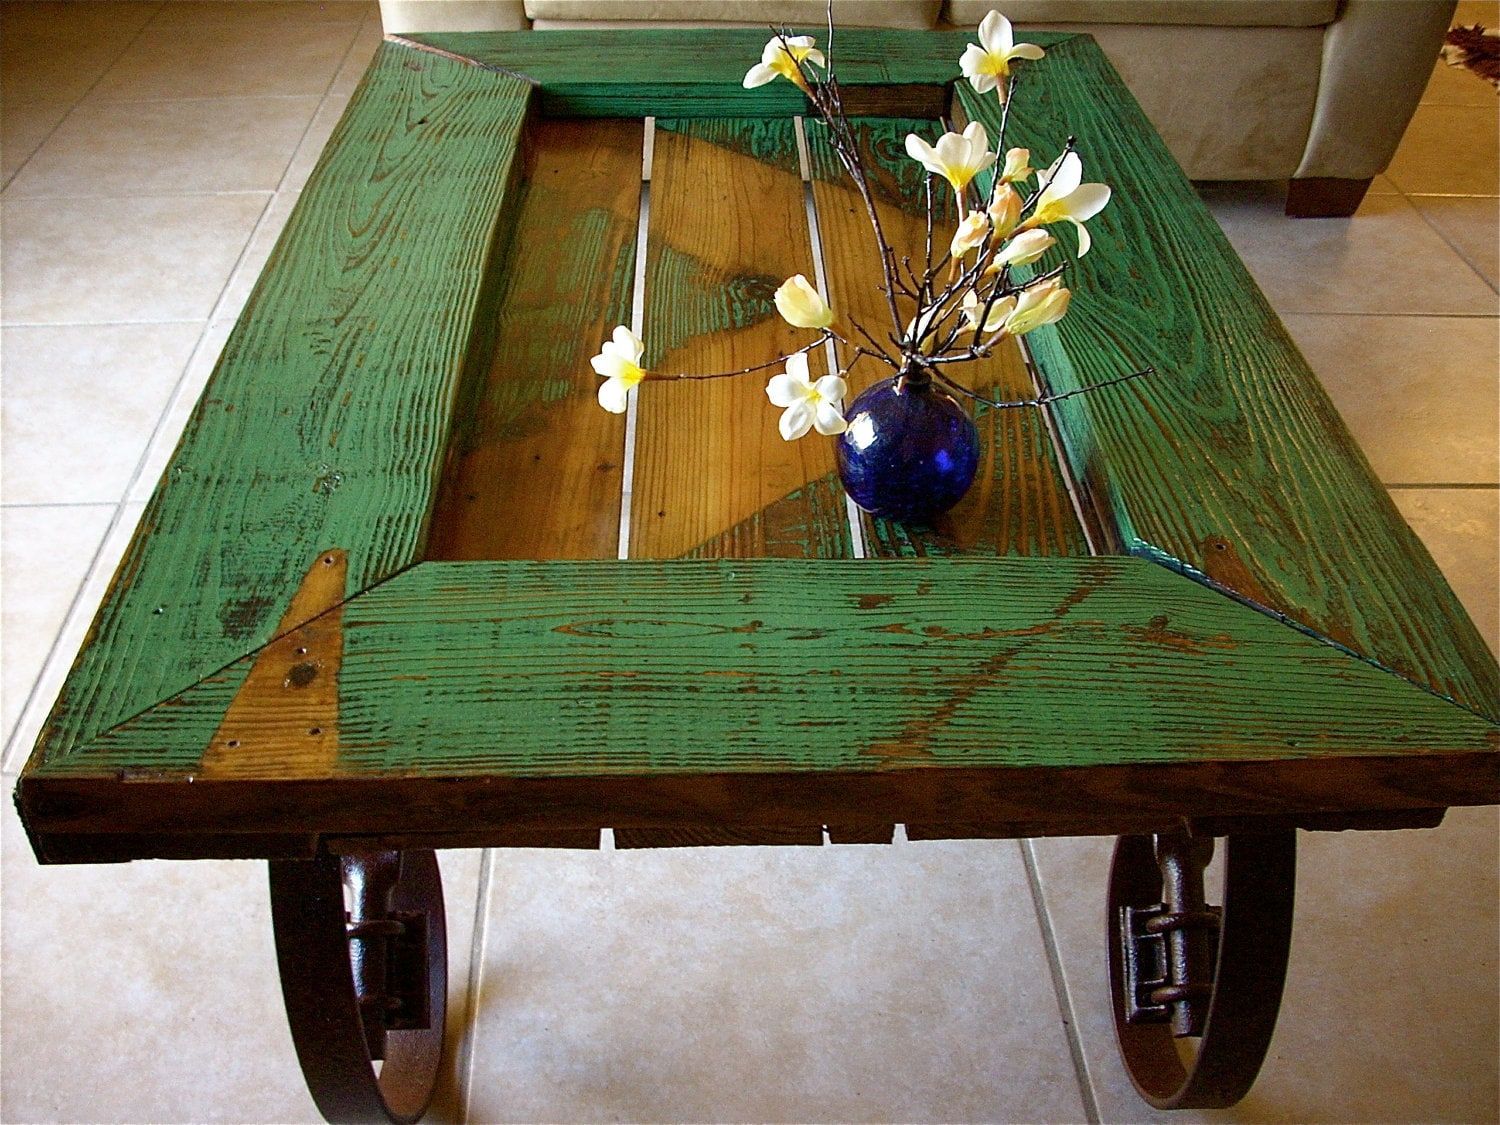 Barn Door Coffee Table Inside Coffee Tables With Storage And Barn Doors (Gallery 7 of 20)